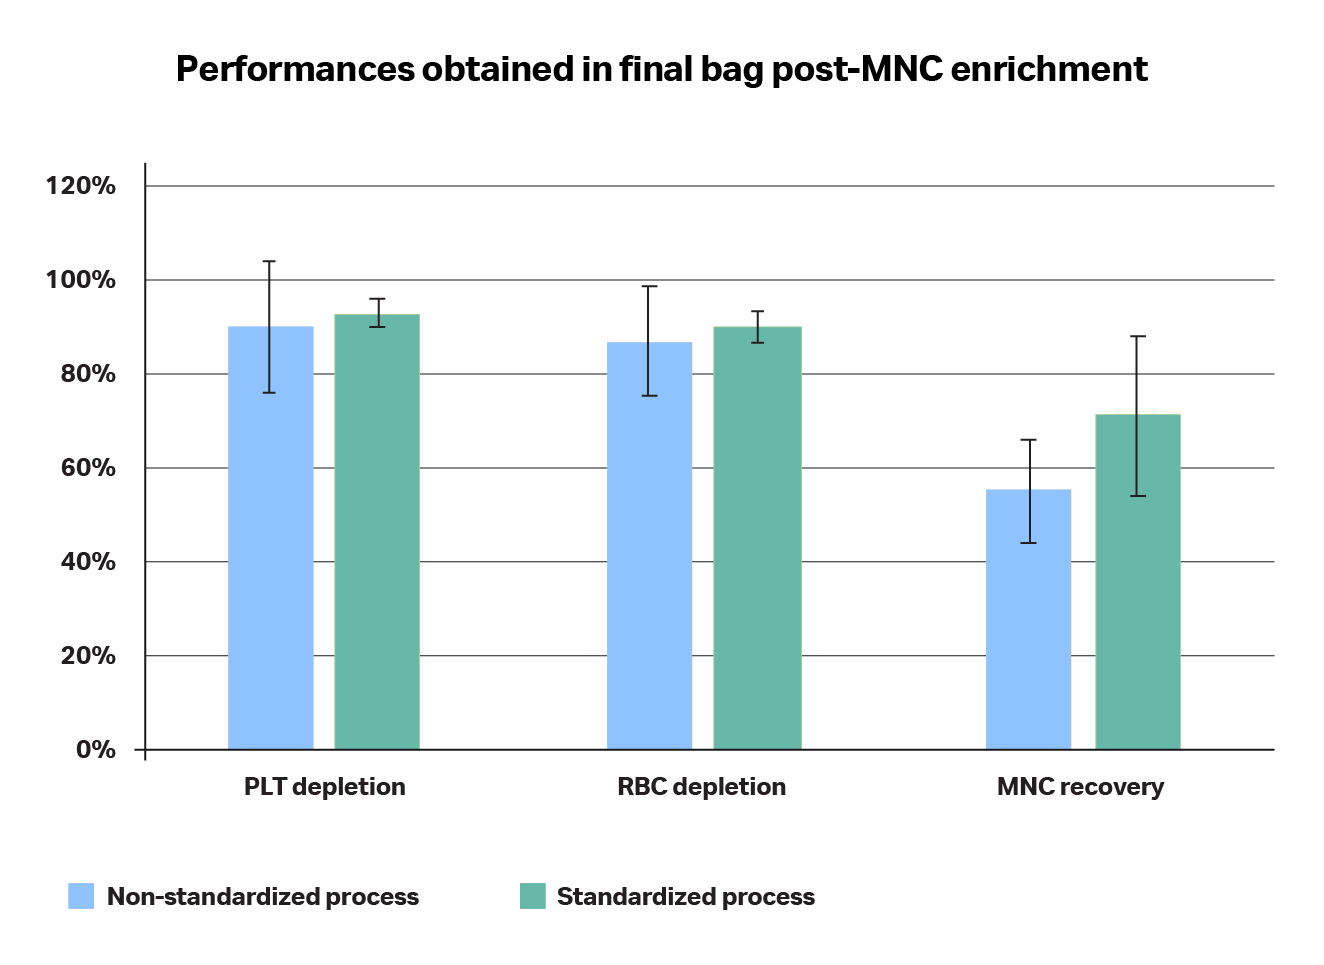 Comparison of performances in terms of RBC and PLT depletions and MNC recoveries when using a non-standardized (A) versus standardized (B) processes.